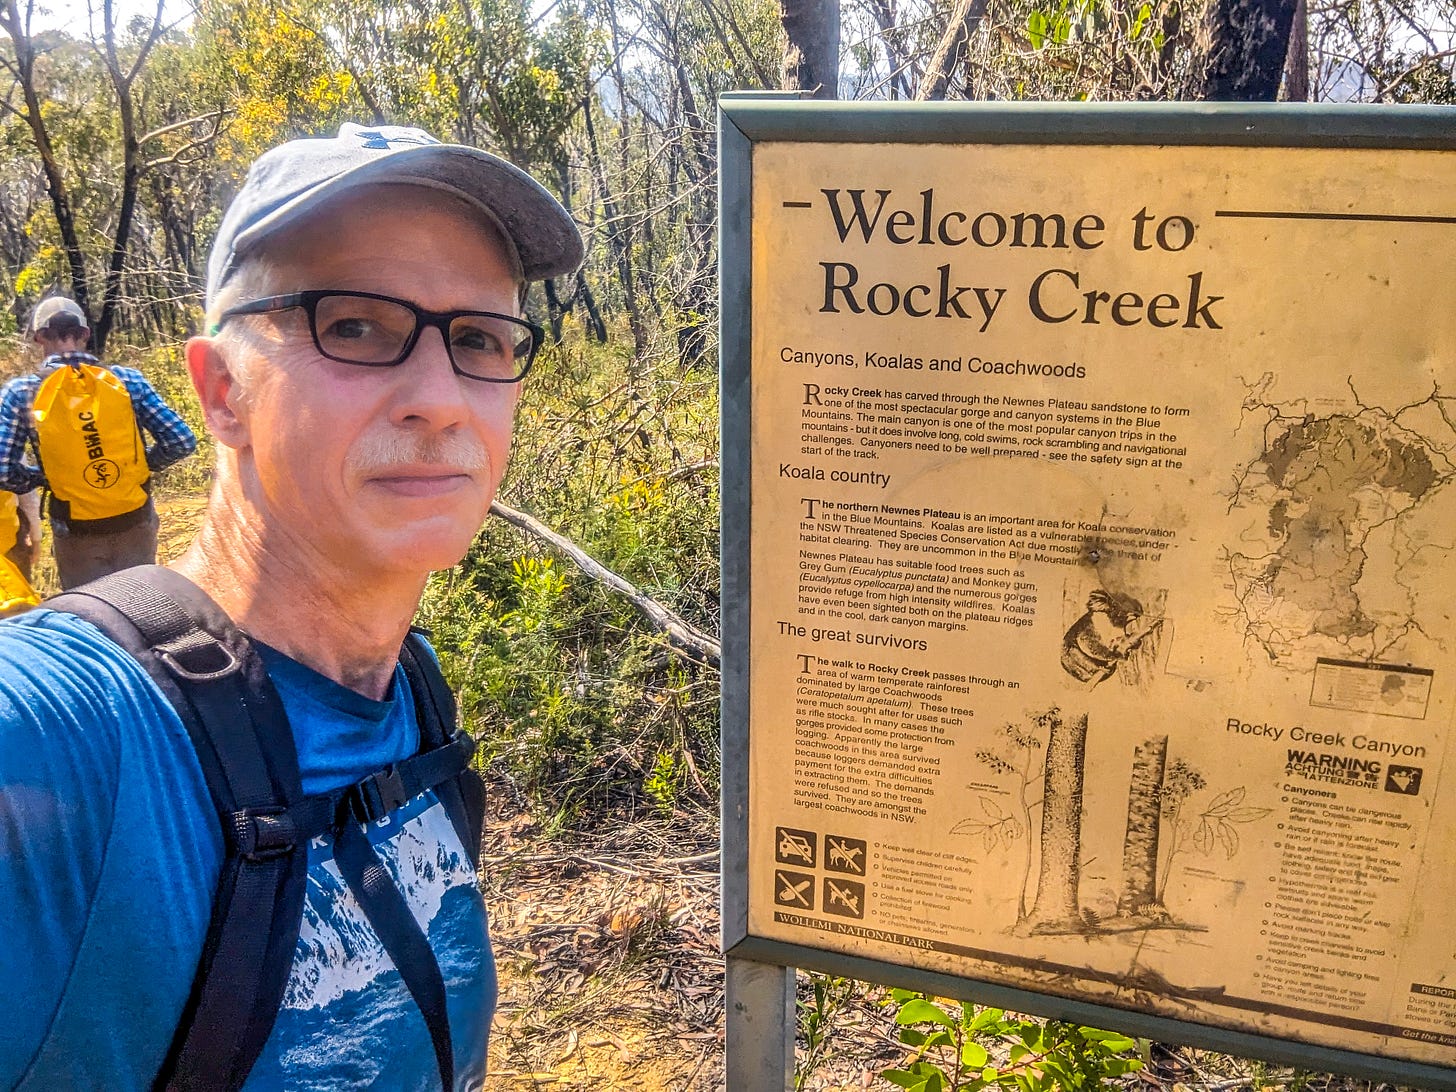 Michael standing in front of NPS sign reading Welcome to Rocky Creek.